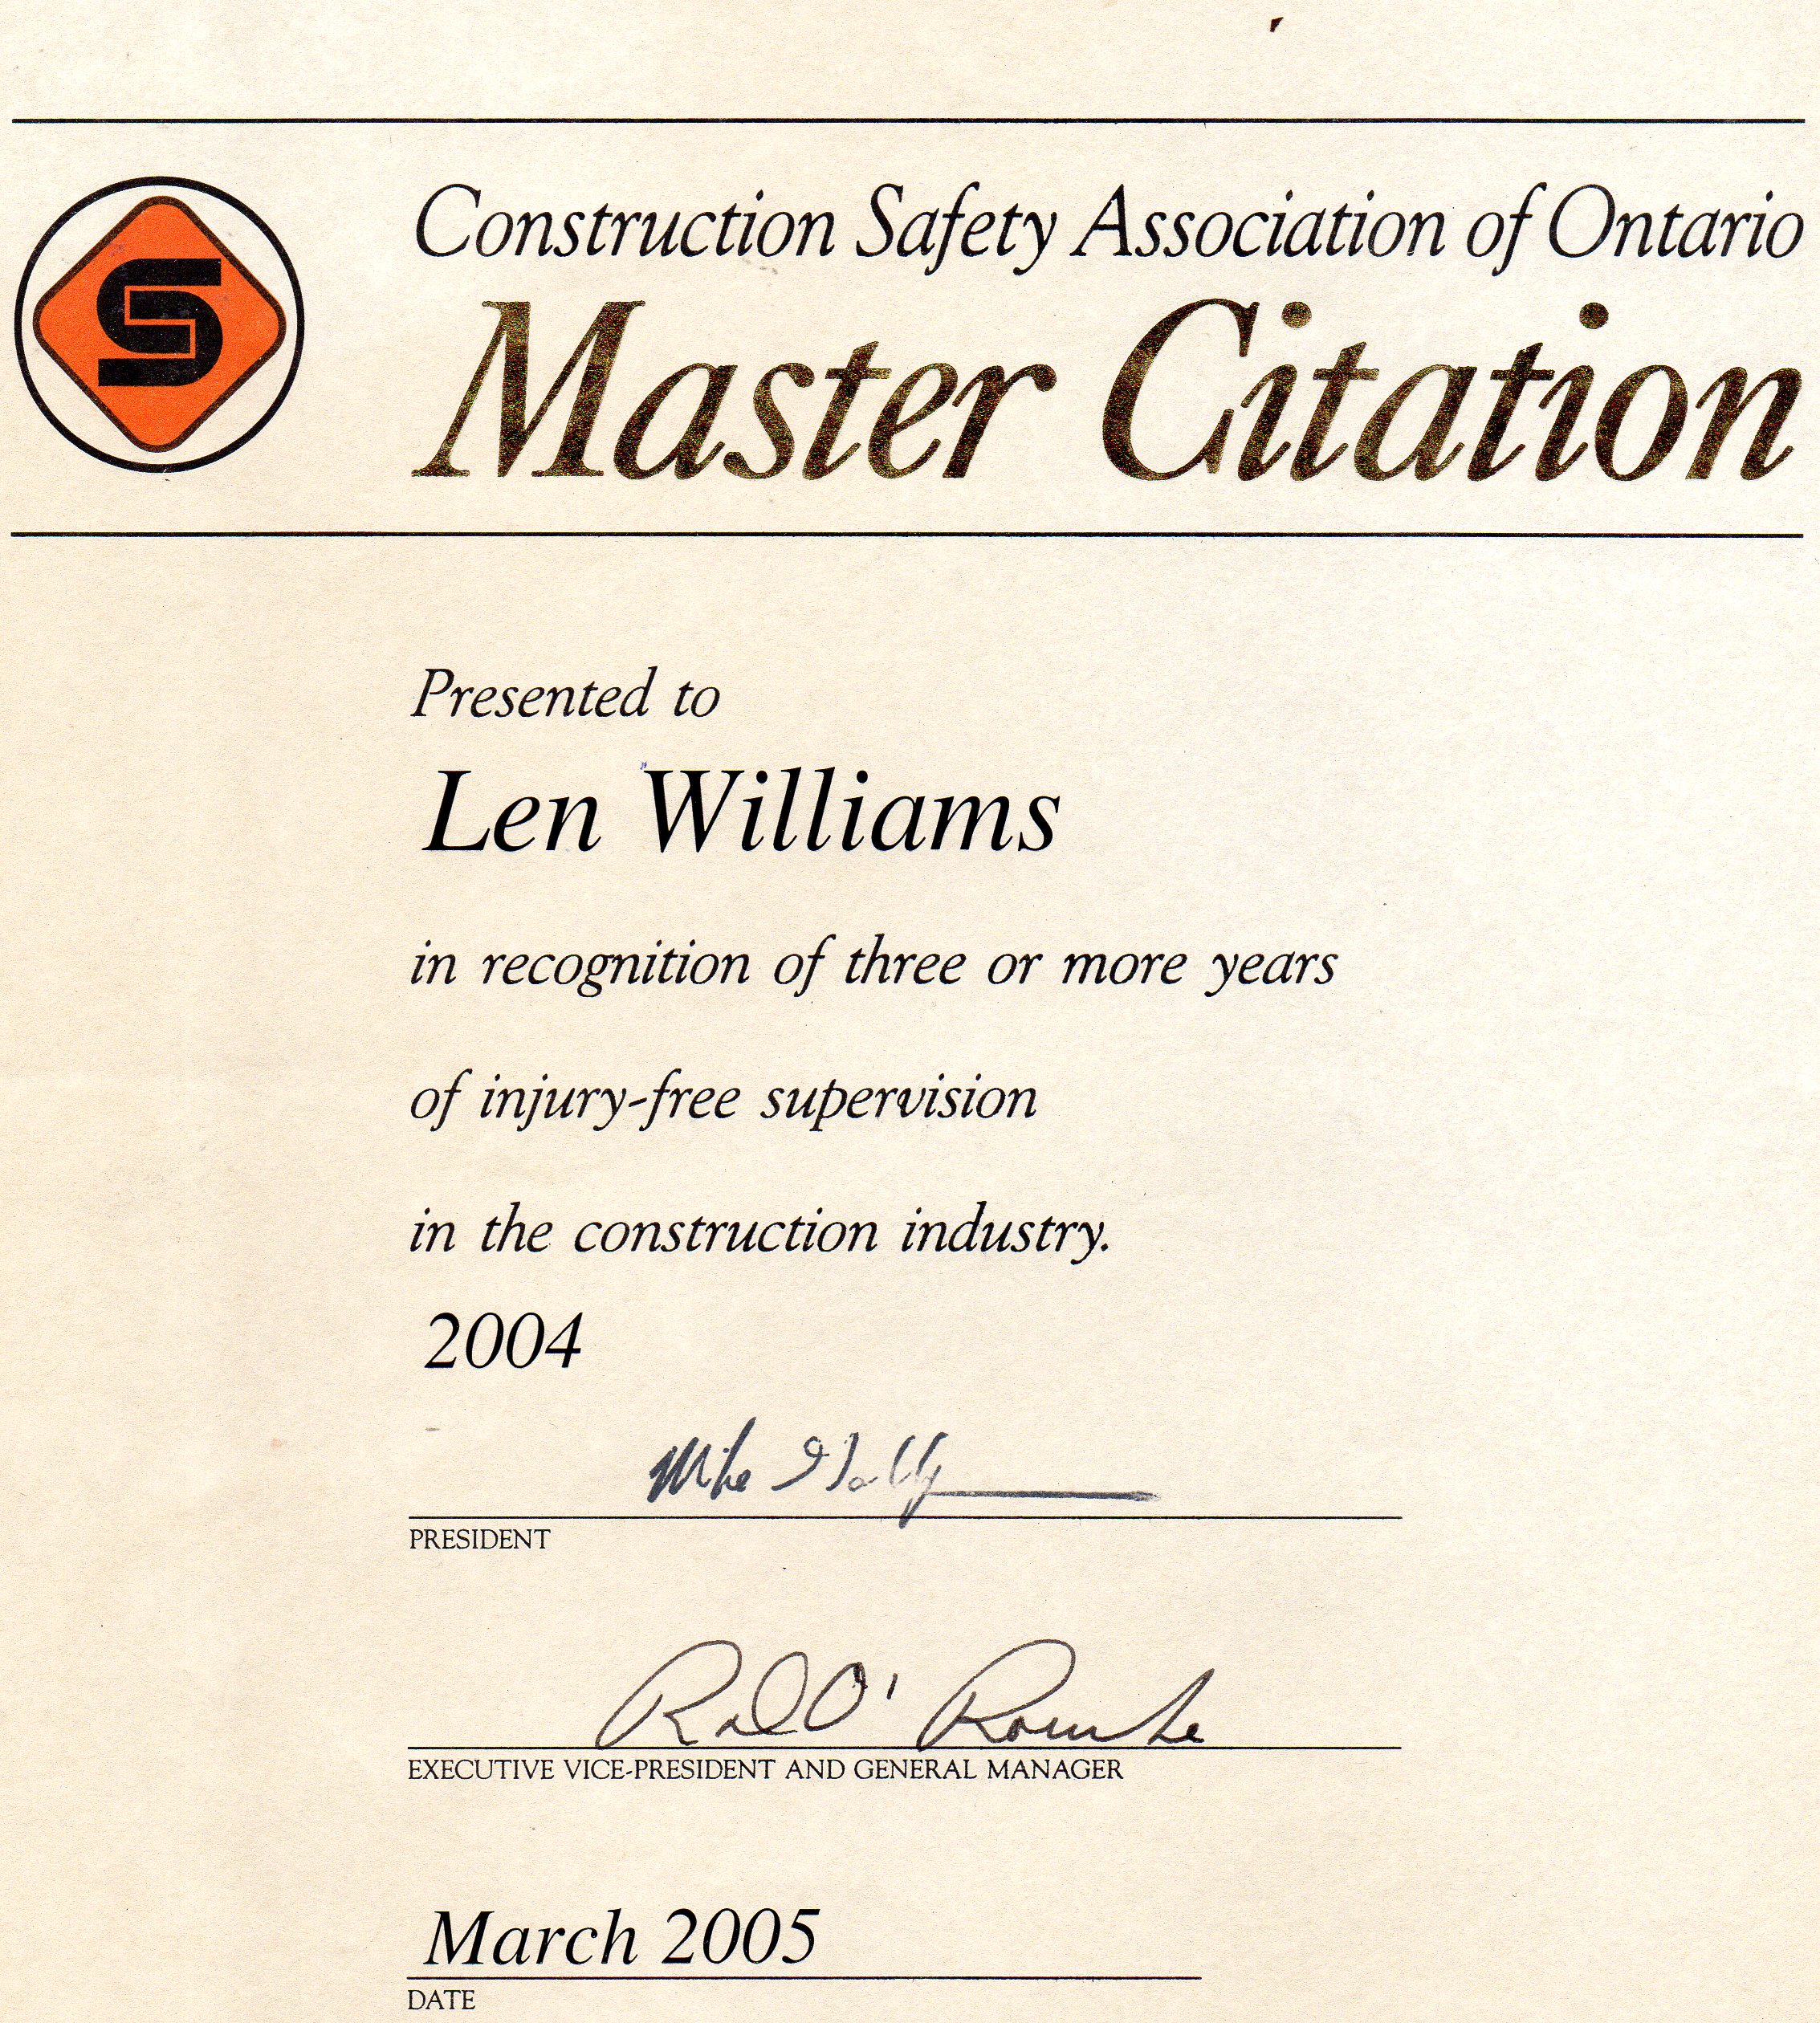 Construction Safety Association of Ontario

&gt; Master Citation

Presented to

Len Williams

In recognition of three or more years
of mjury-free supervision

in the construction industry.
2004
we ilo

PRESIDENT

07

EXECUTIVE VICE-PRESIDENT AND GENERAL MANAGER

March 2005

DATE